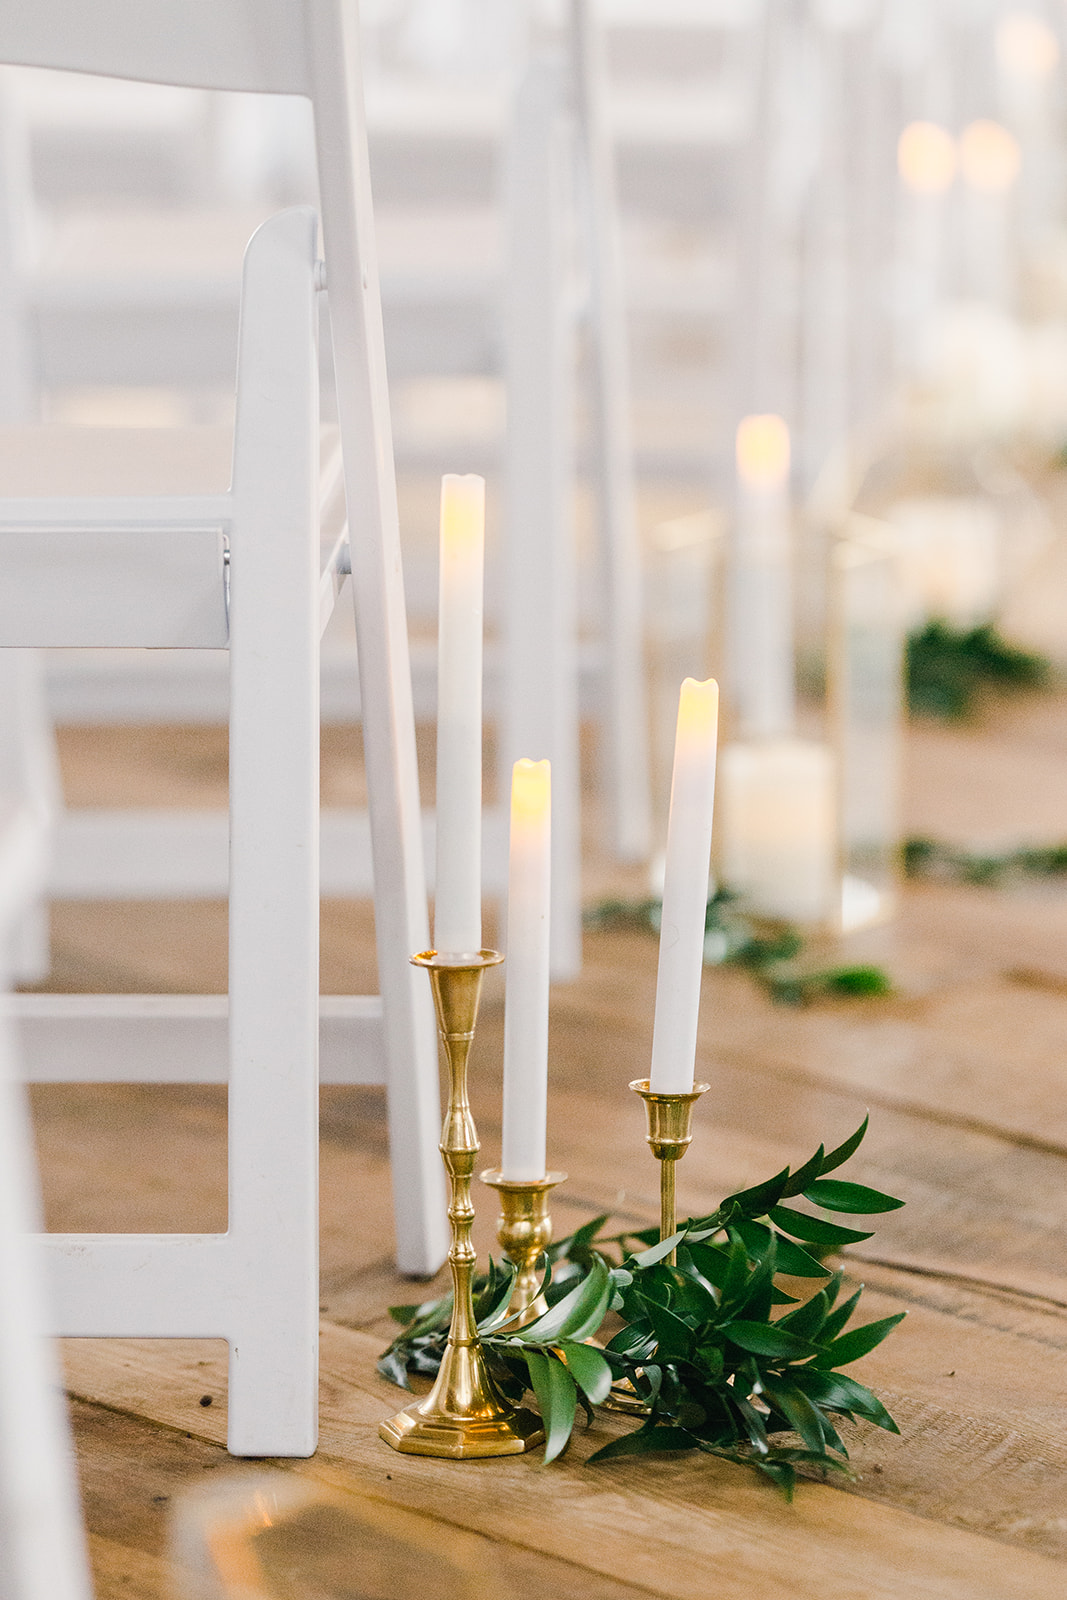 wedding ceremony aisle decor with gold candlesticks, taper candles and styled greenery by Studio Fleurette in a barn wedding in Wisconsin.